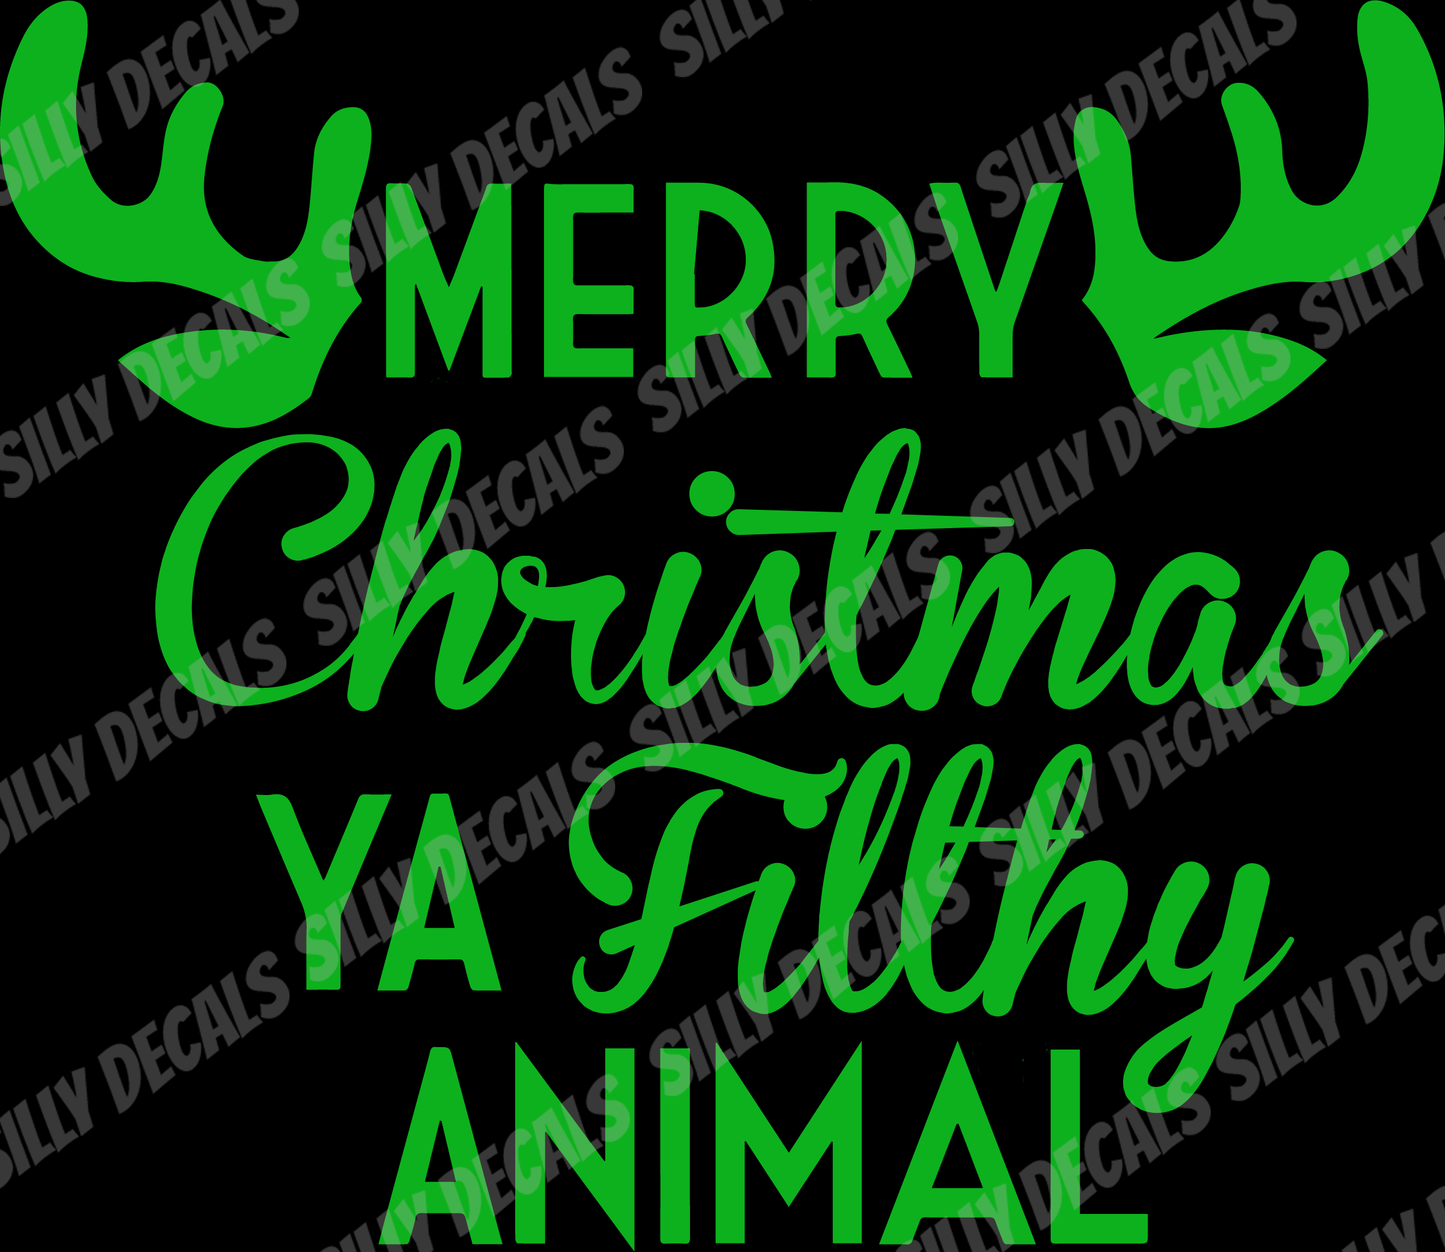 Merry Christmas Ya Filthy Animal; Funny Christmas Holiday Decoration Vinyl Decals Suitable For Cars, Windows, Walls, and More!